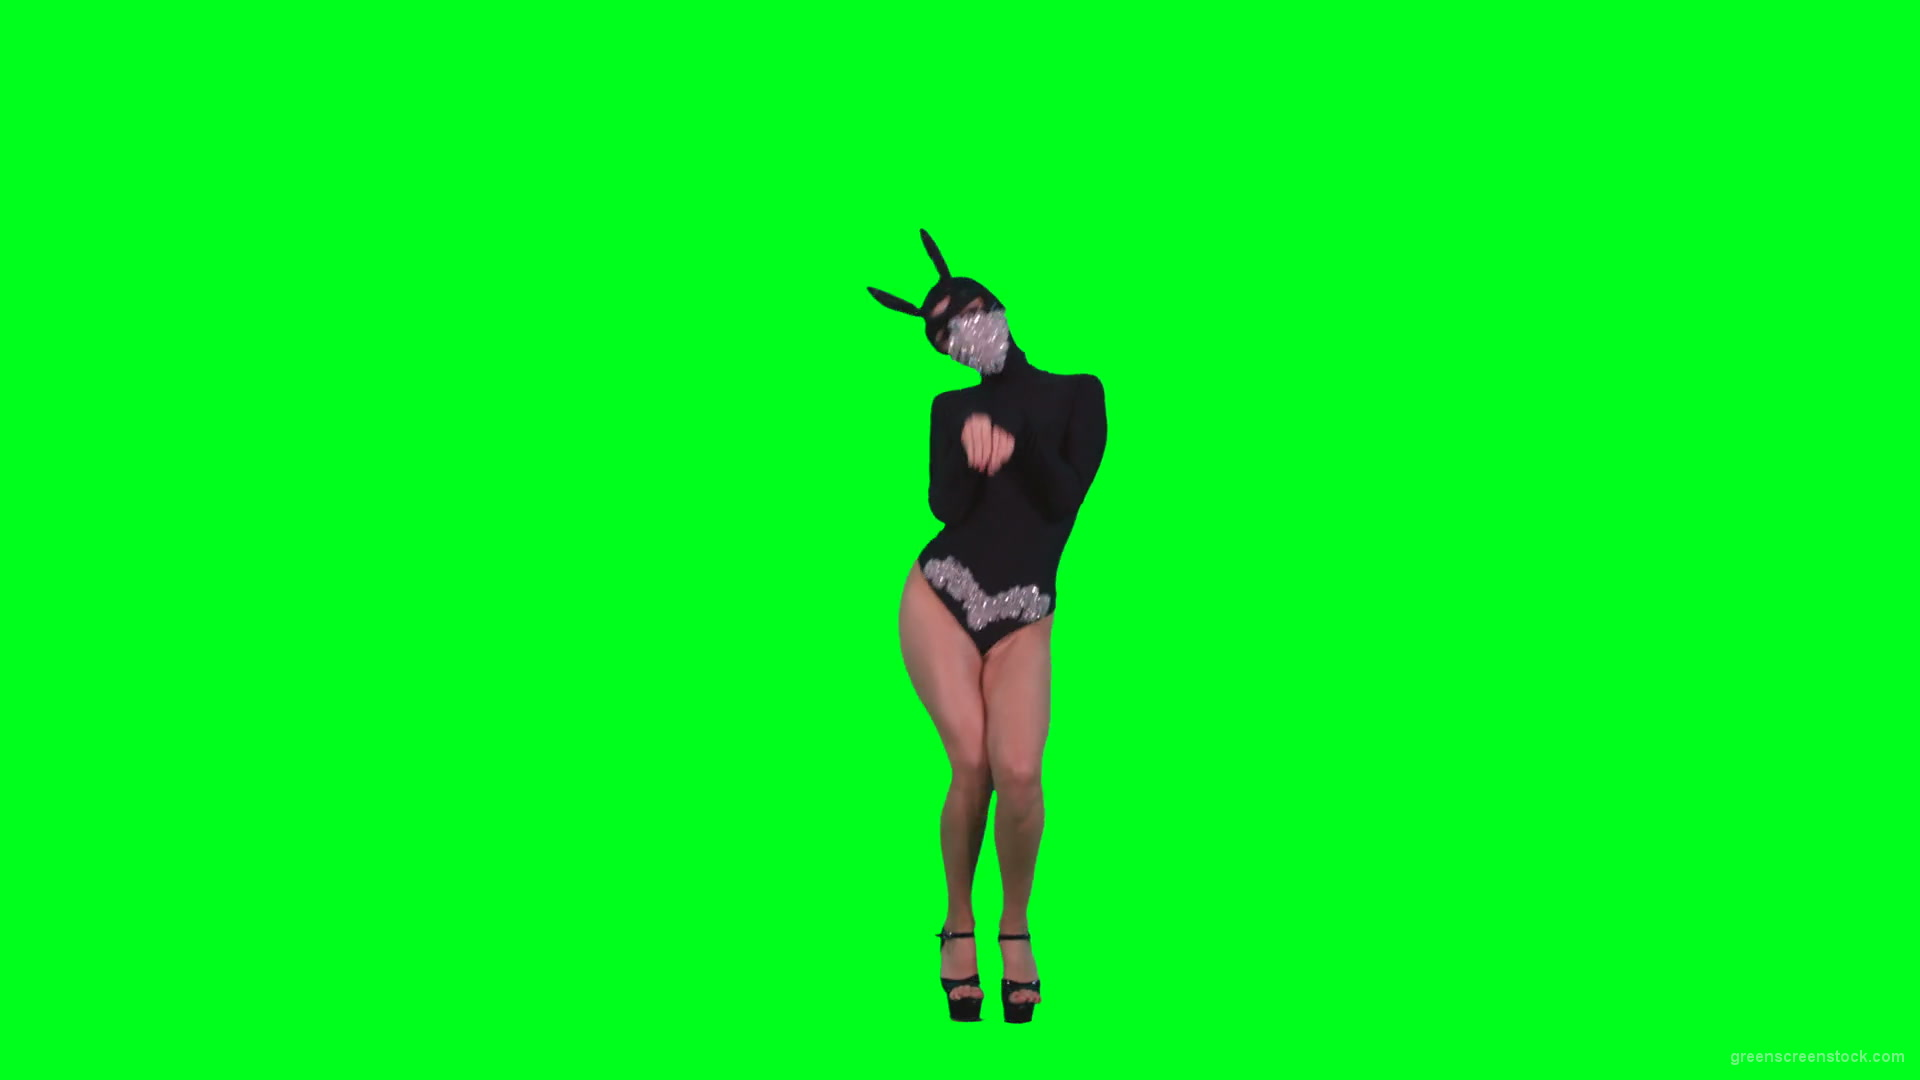 Go-Go-Dancing-Girl-in-Rabbit-Mask-jumping-in-black-costume-on-Green-Screen-4K-Video-Footage-1920_005 Green Screen Stock